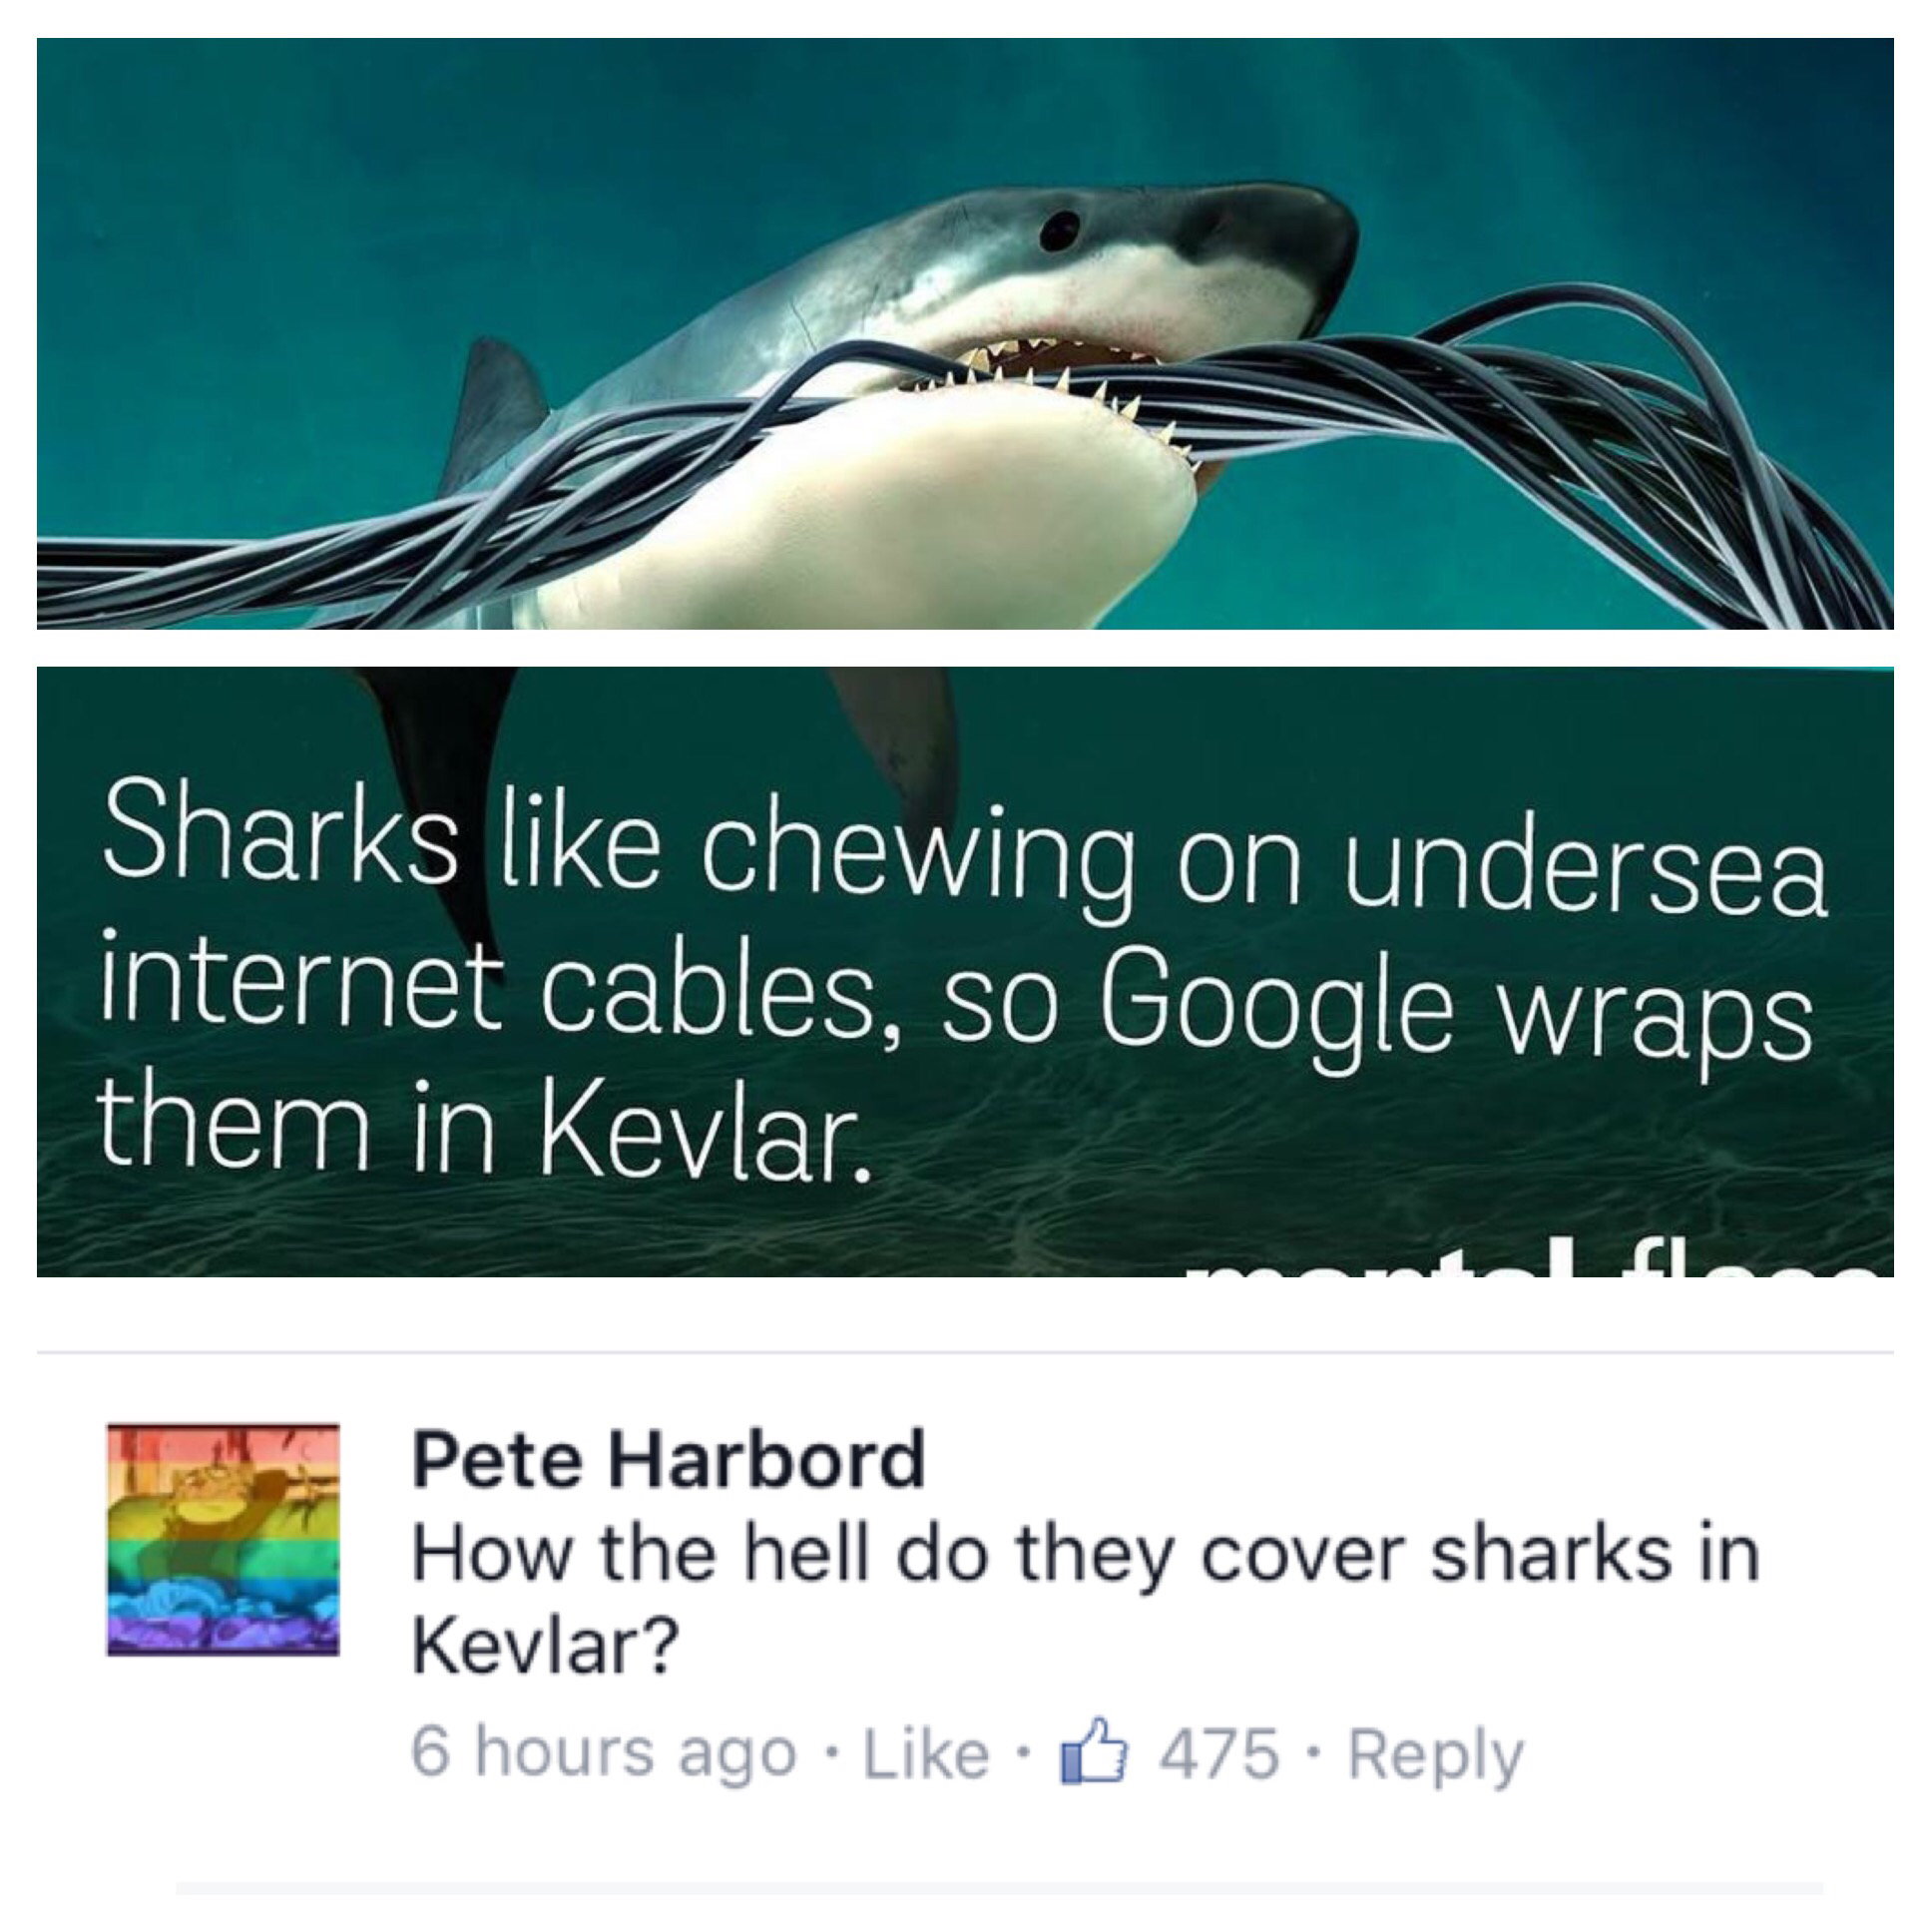 kevlar shark - Sharks chewing on undersea internet cables, so Google wraps them in Kevlar. Pete Harbord How the hell do they cover sharks in Kevlar? 6 hours ago . 475.